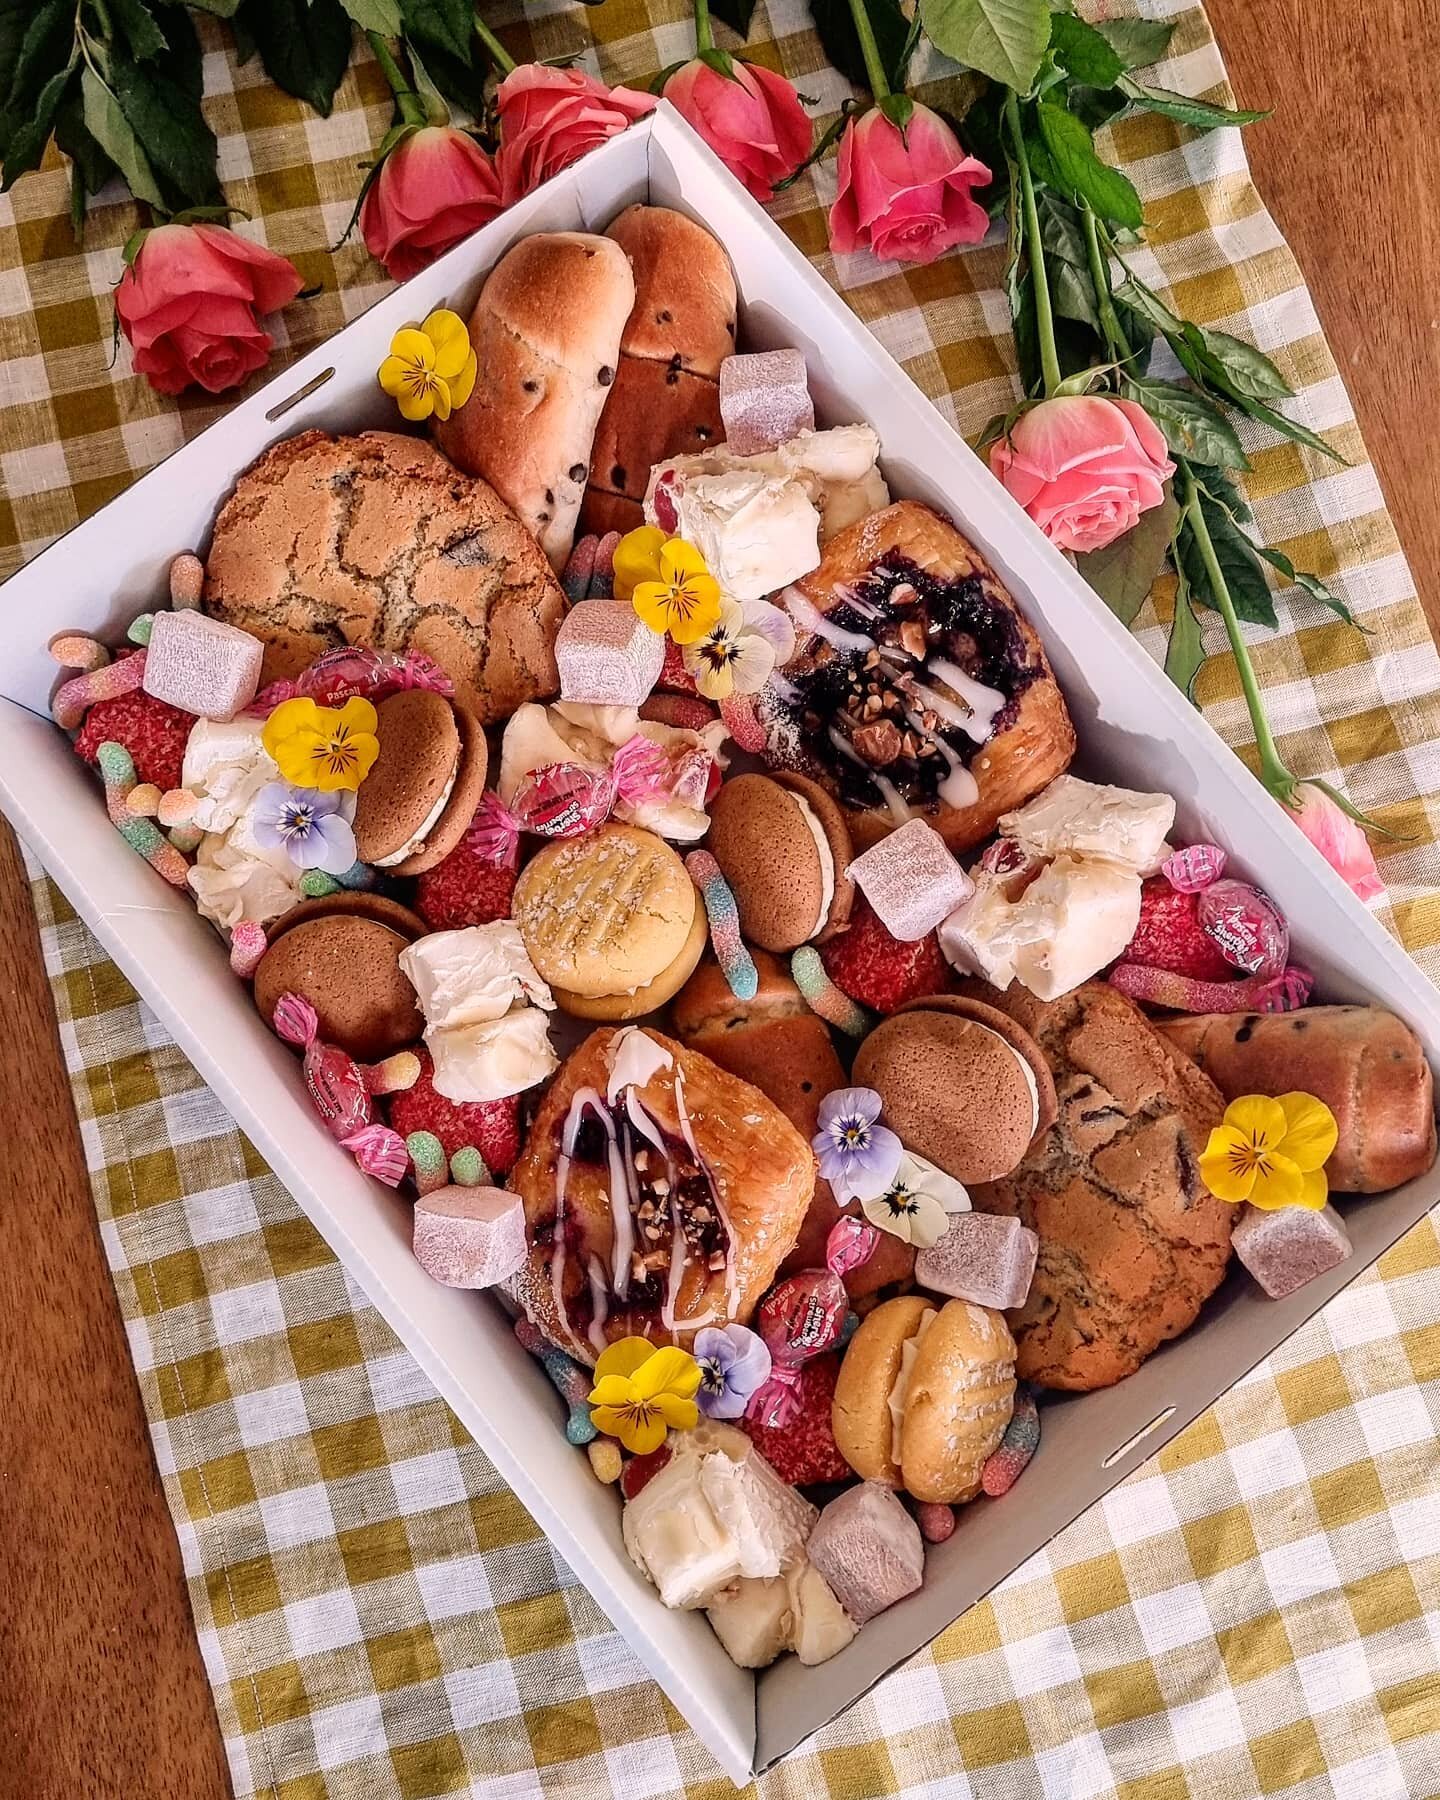 Our dessert platters contain delicious  sweets sourced from the areas of Trentham and daylesford. The Trentham bakehouse, Trentham general, Blake's in Daylesford and on the weekends some yummy snacks from Redbeard Bakery.